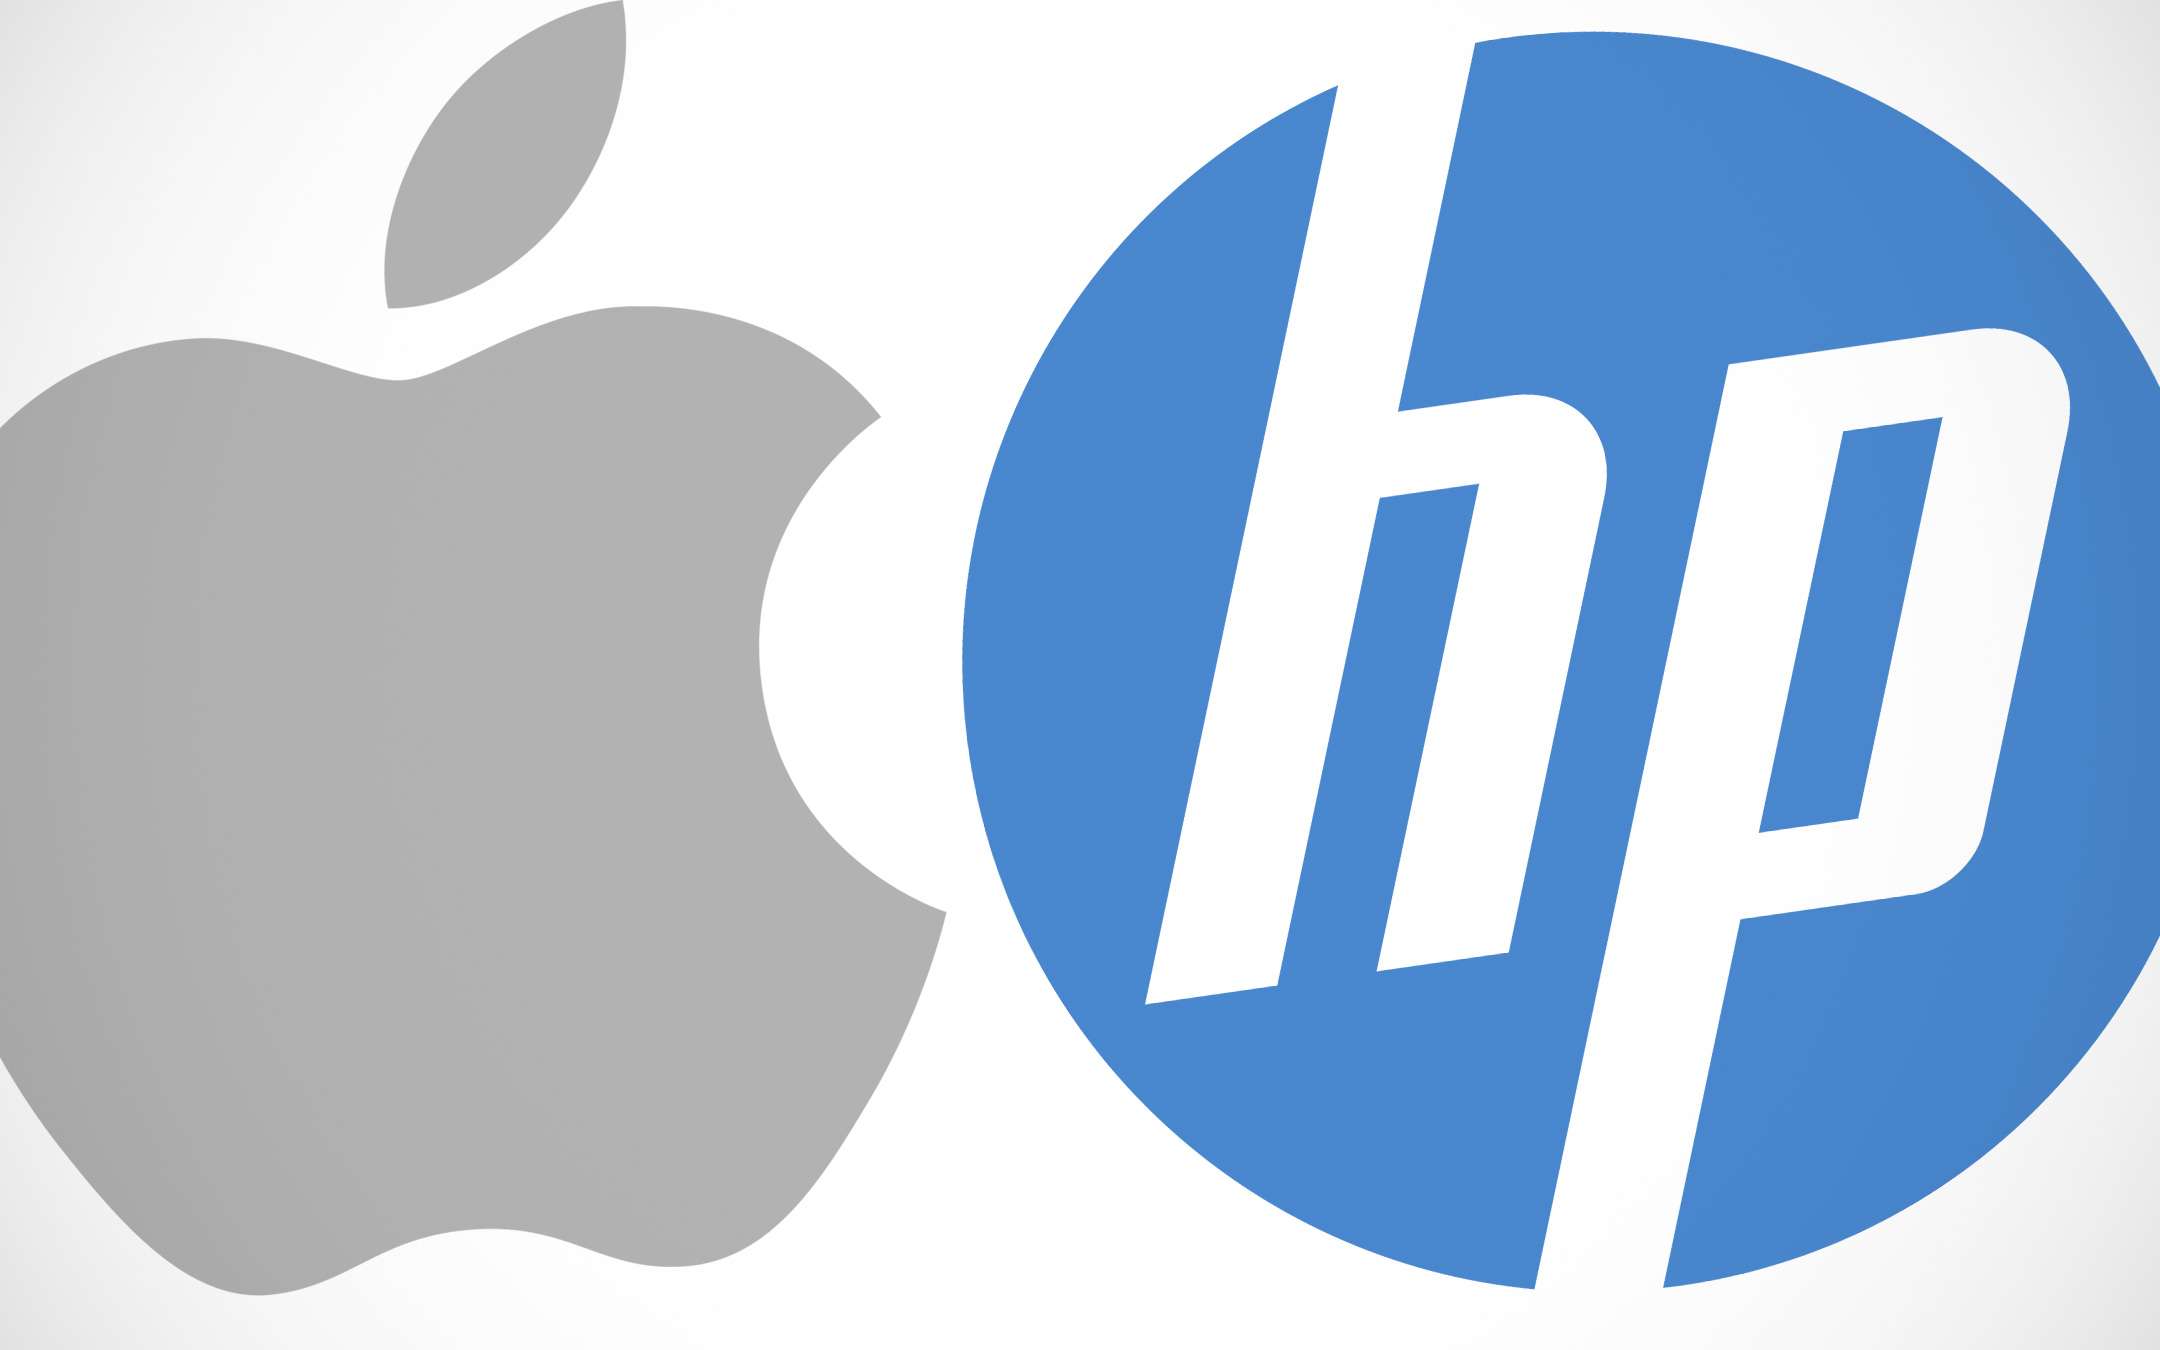 On Macs, there is a problem with HP printers